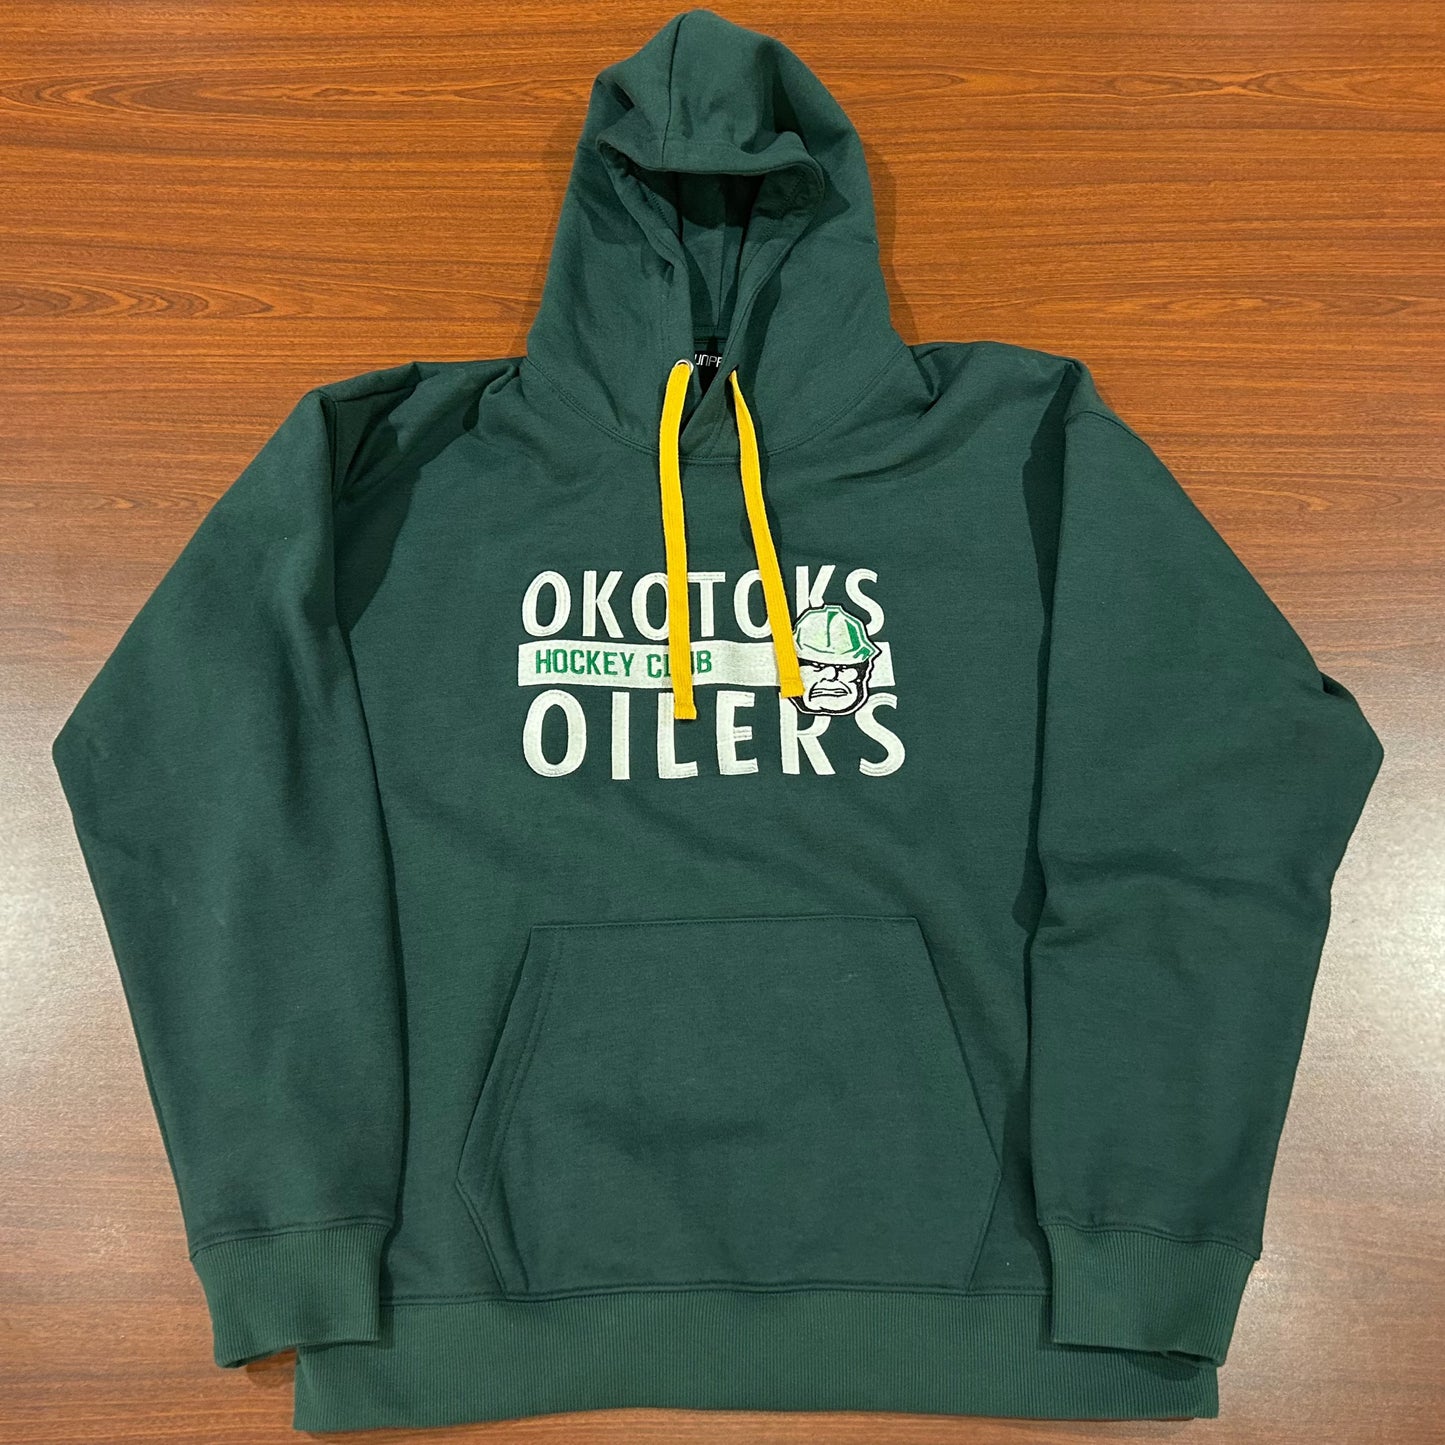 Green hoodie with OKOTOKS OILERS HOCKEY CLUB and the Okotoks Oilers' Rigger head logo embroidered on the chest. The hoodie also has a yellow drawstring.